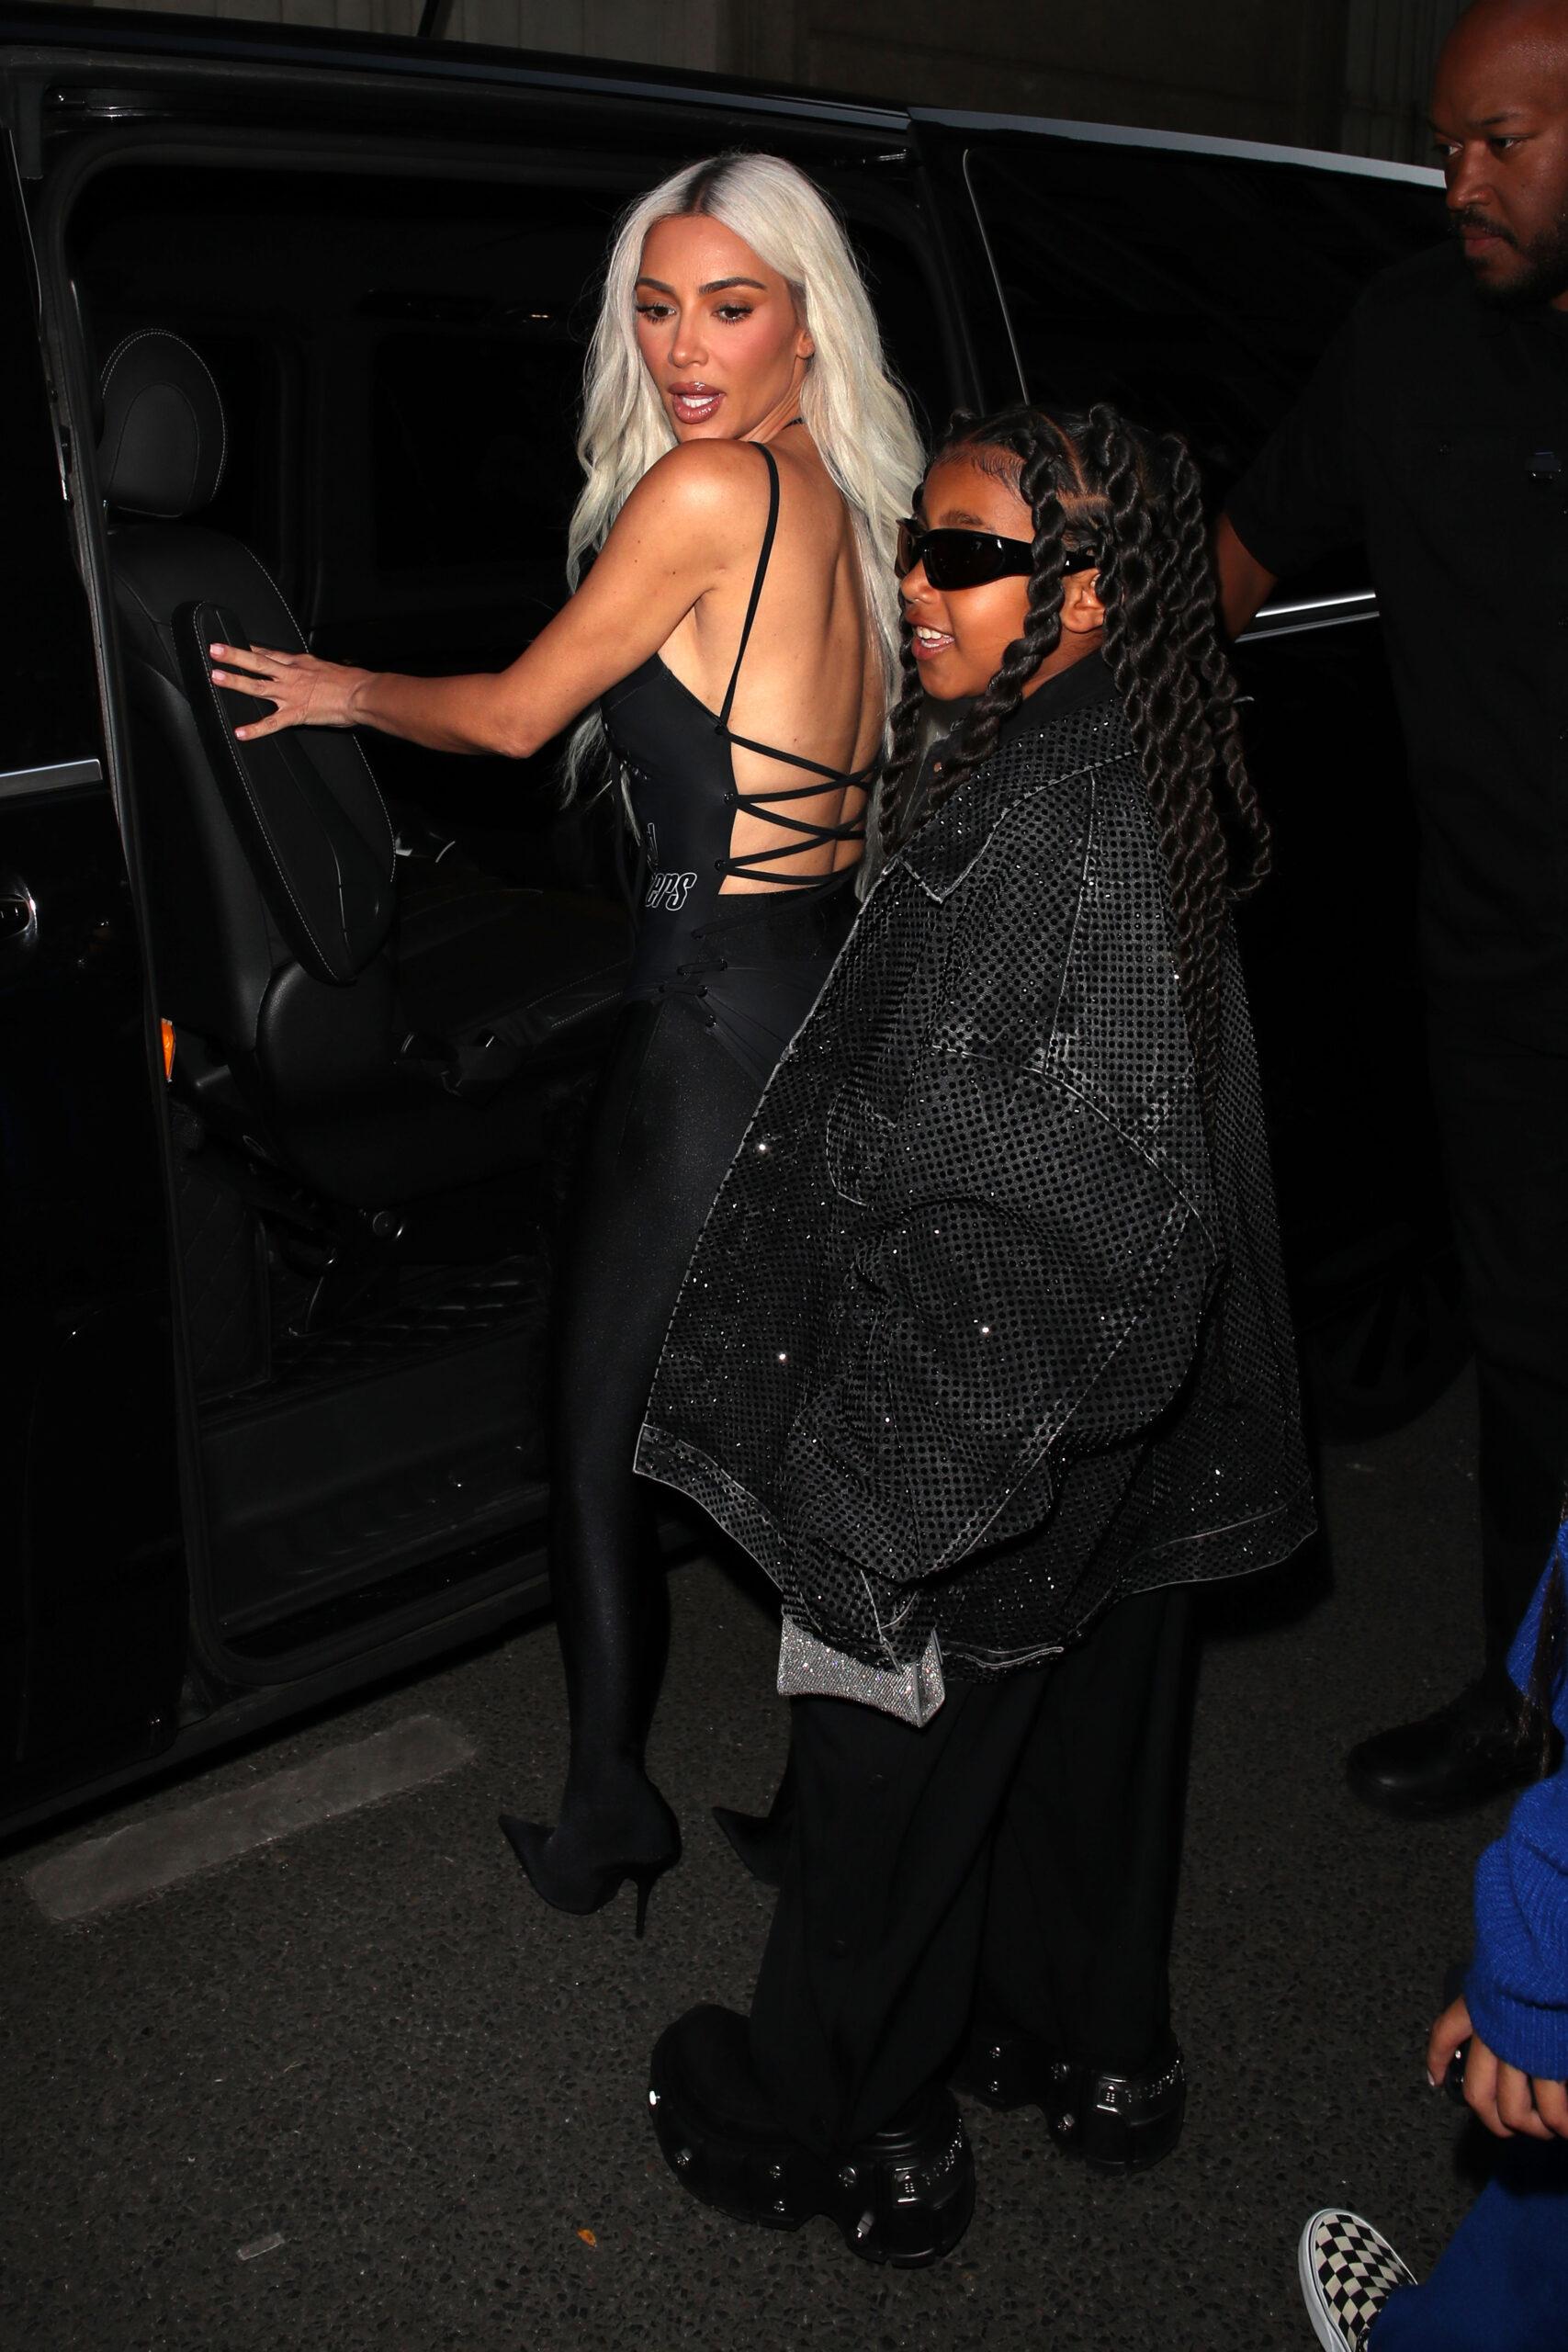 Kim Kardashian and her kids leaving Ferdi and arriving at Costes Restaurant and Hotel